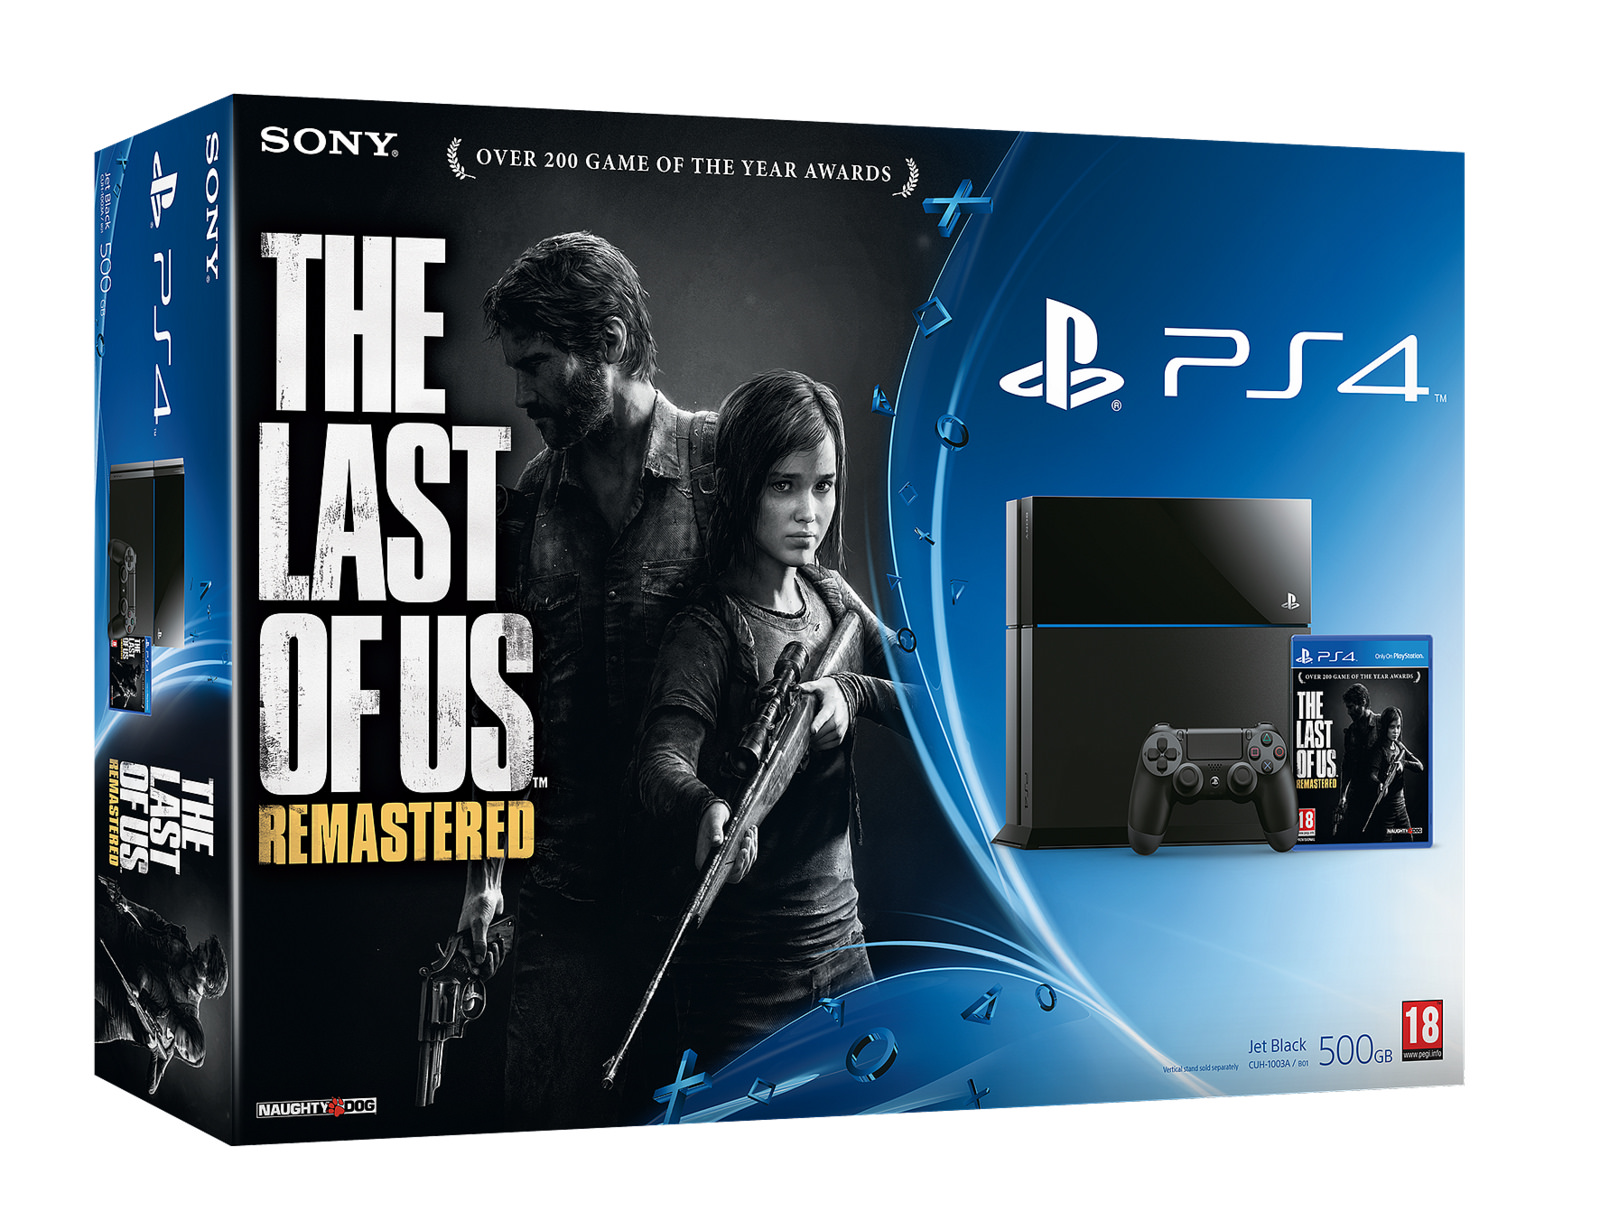 PS4-the last of us remastered bundle